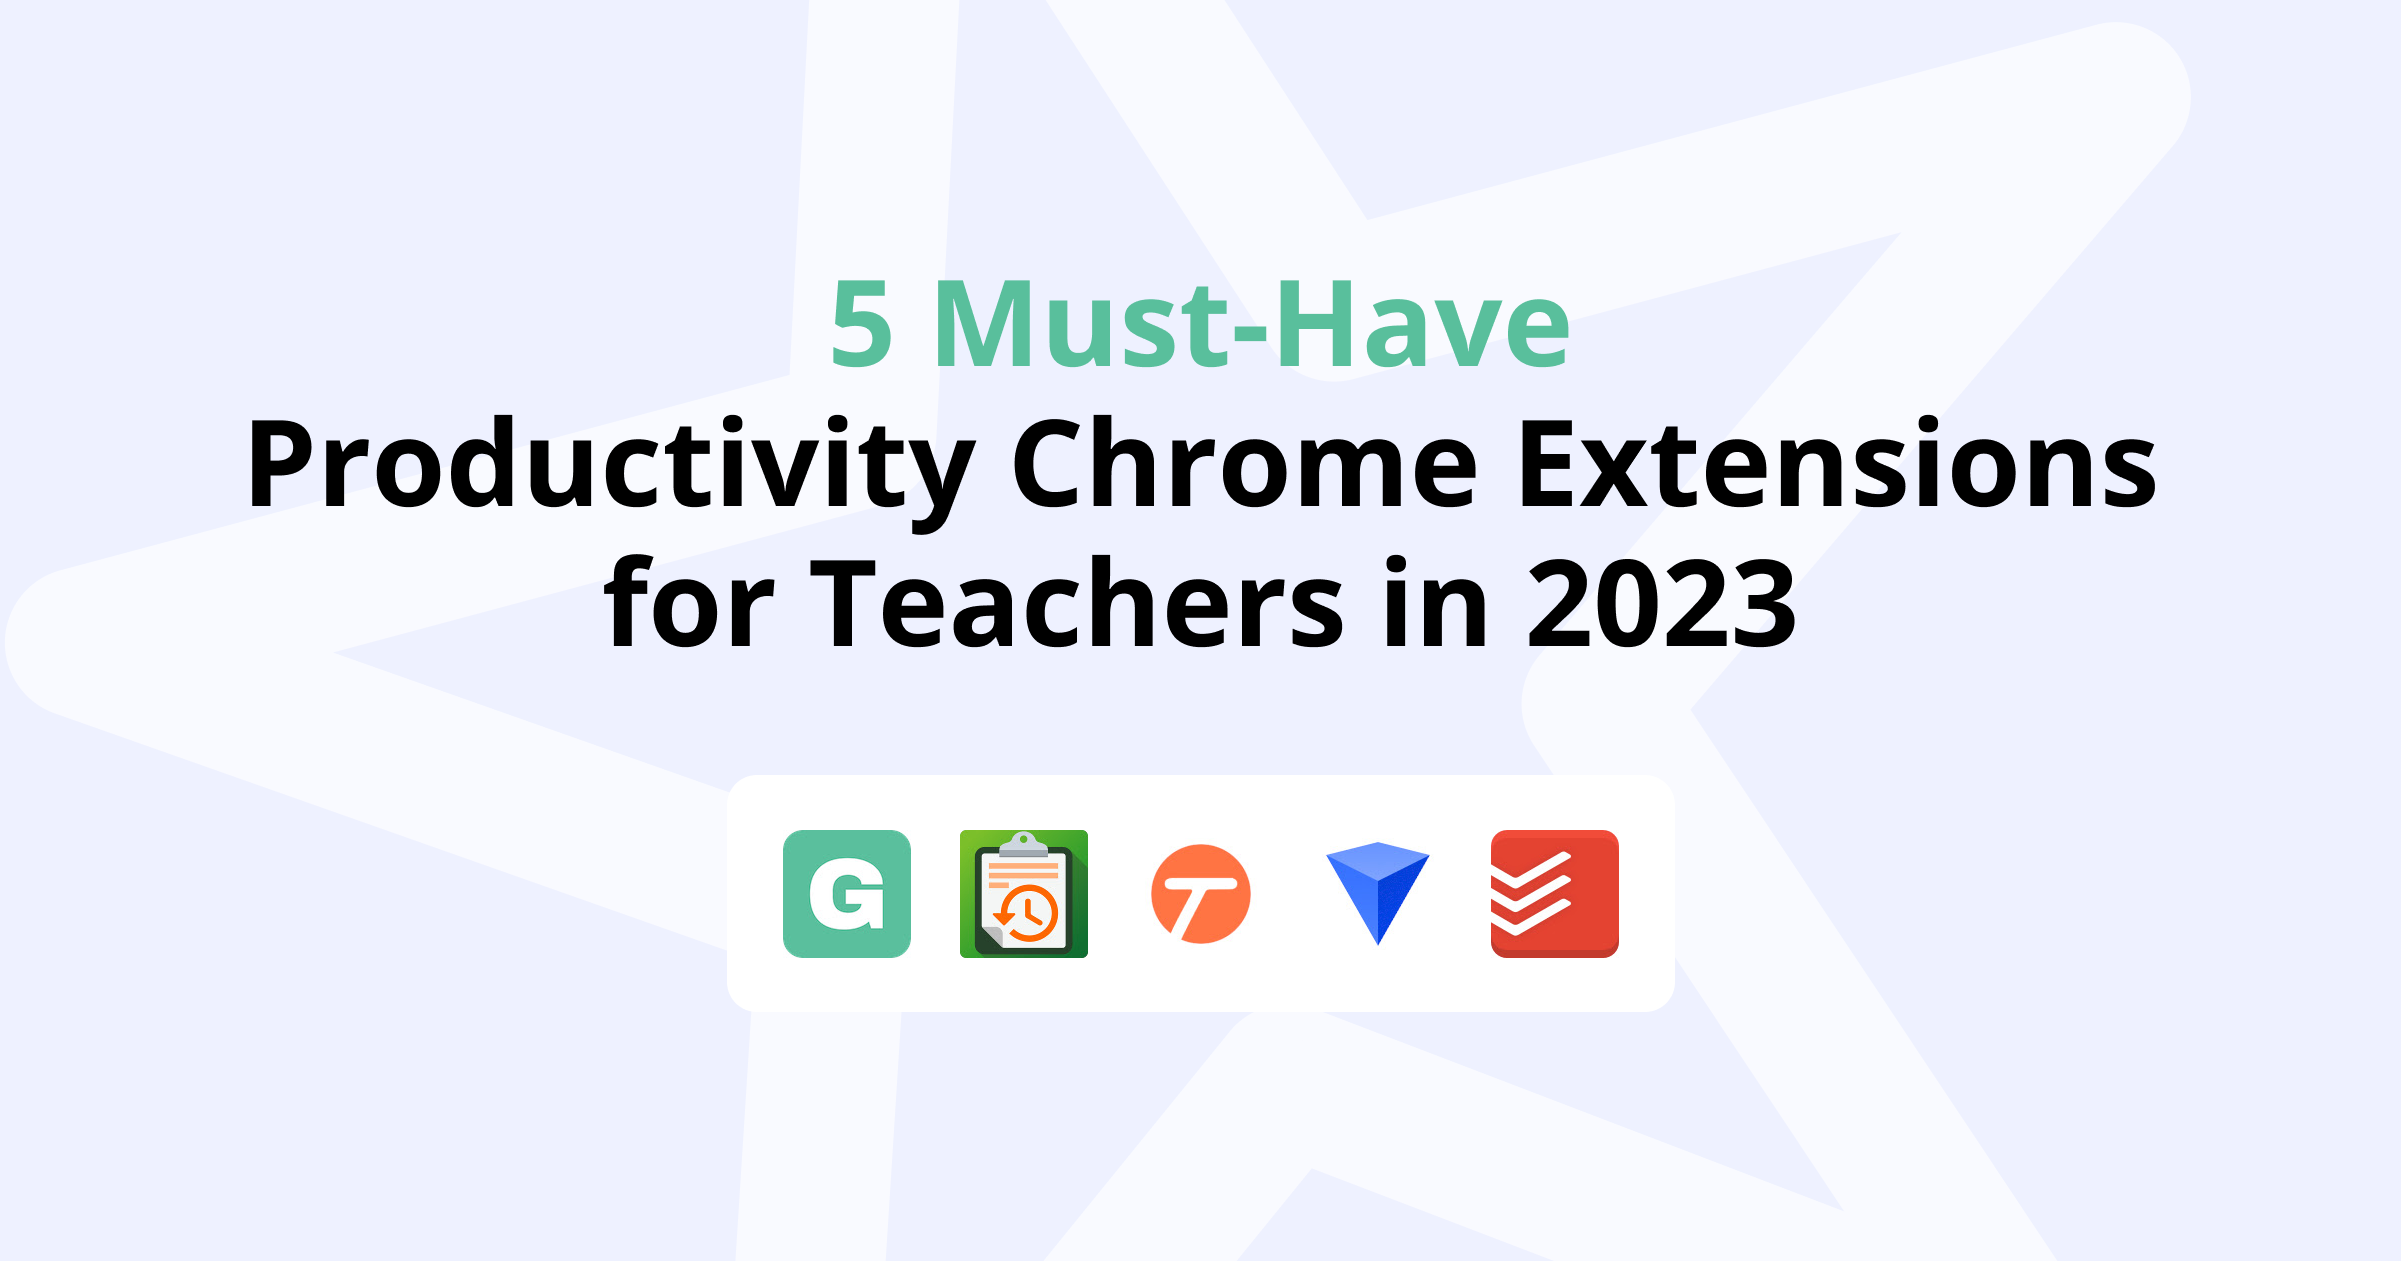 5 Must-Have Productivity Chrome Extensions for Teachers in 2023
